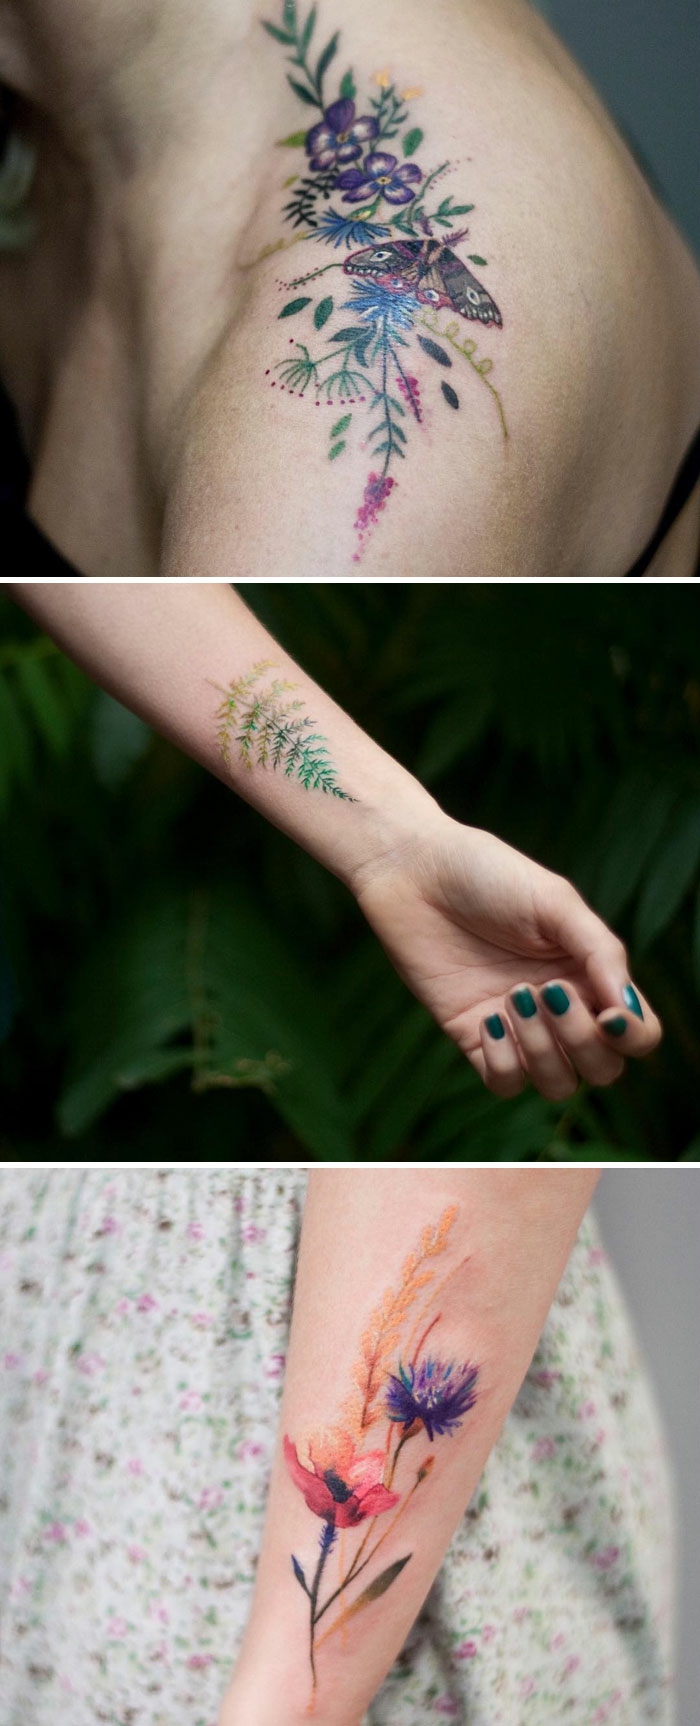 shoulder flower tattoos, with purple, pink and yellow blossoms, green leaves and a butterfly, three-tone fern leaf tattoo near a woman's wrist, water-color effect tattoo, of a poppy and a cornflower, on a person's lower arm